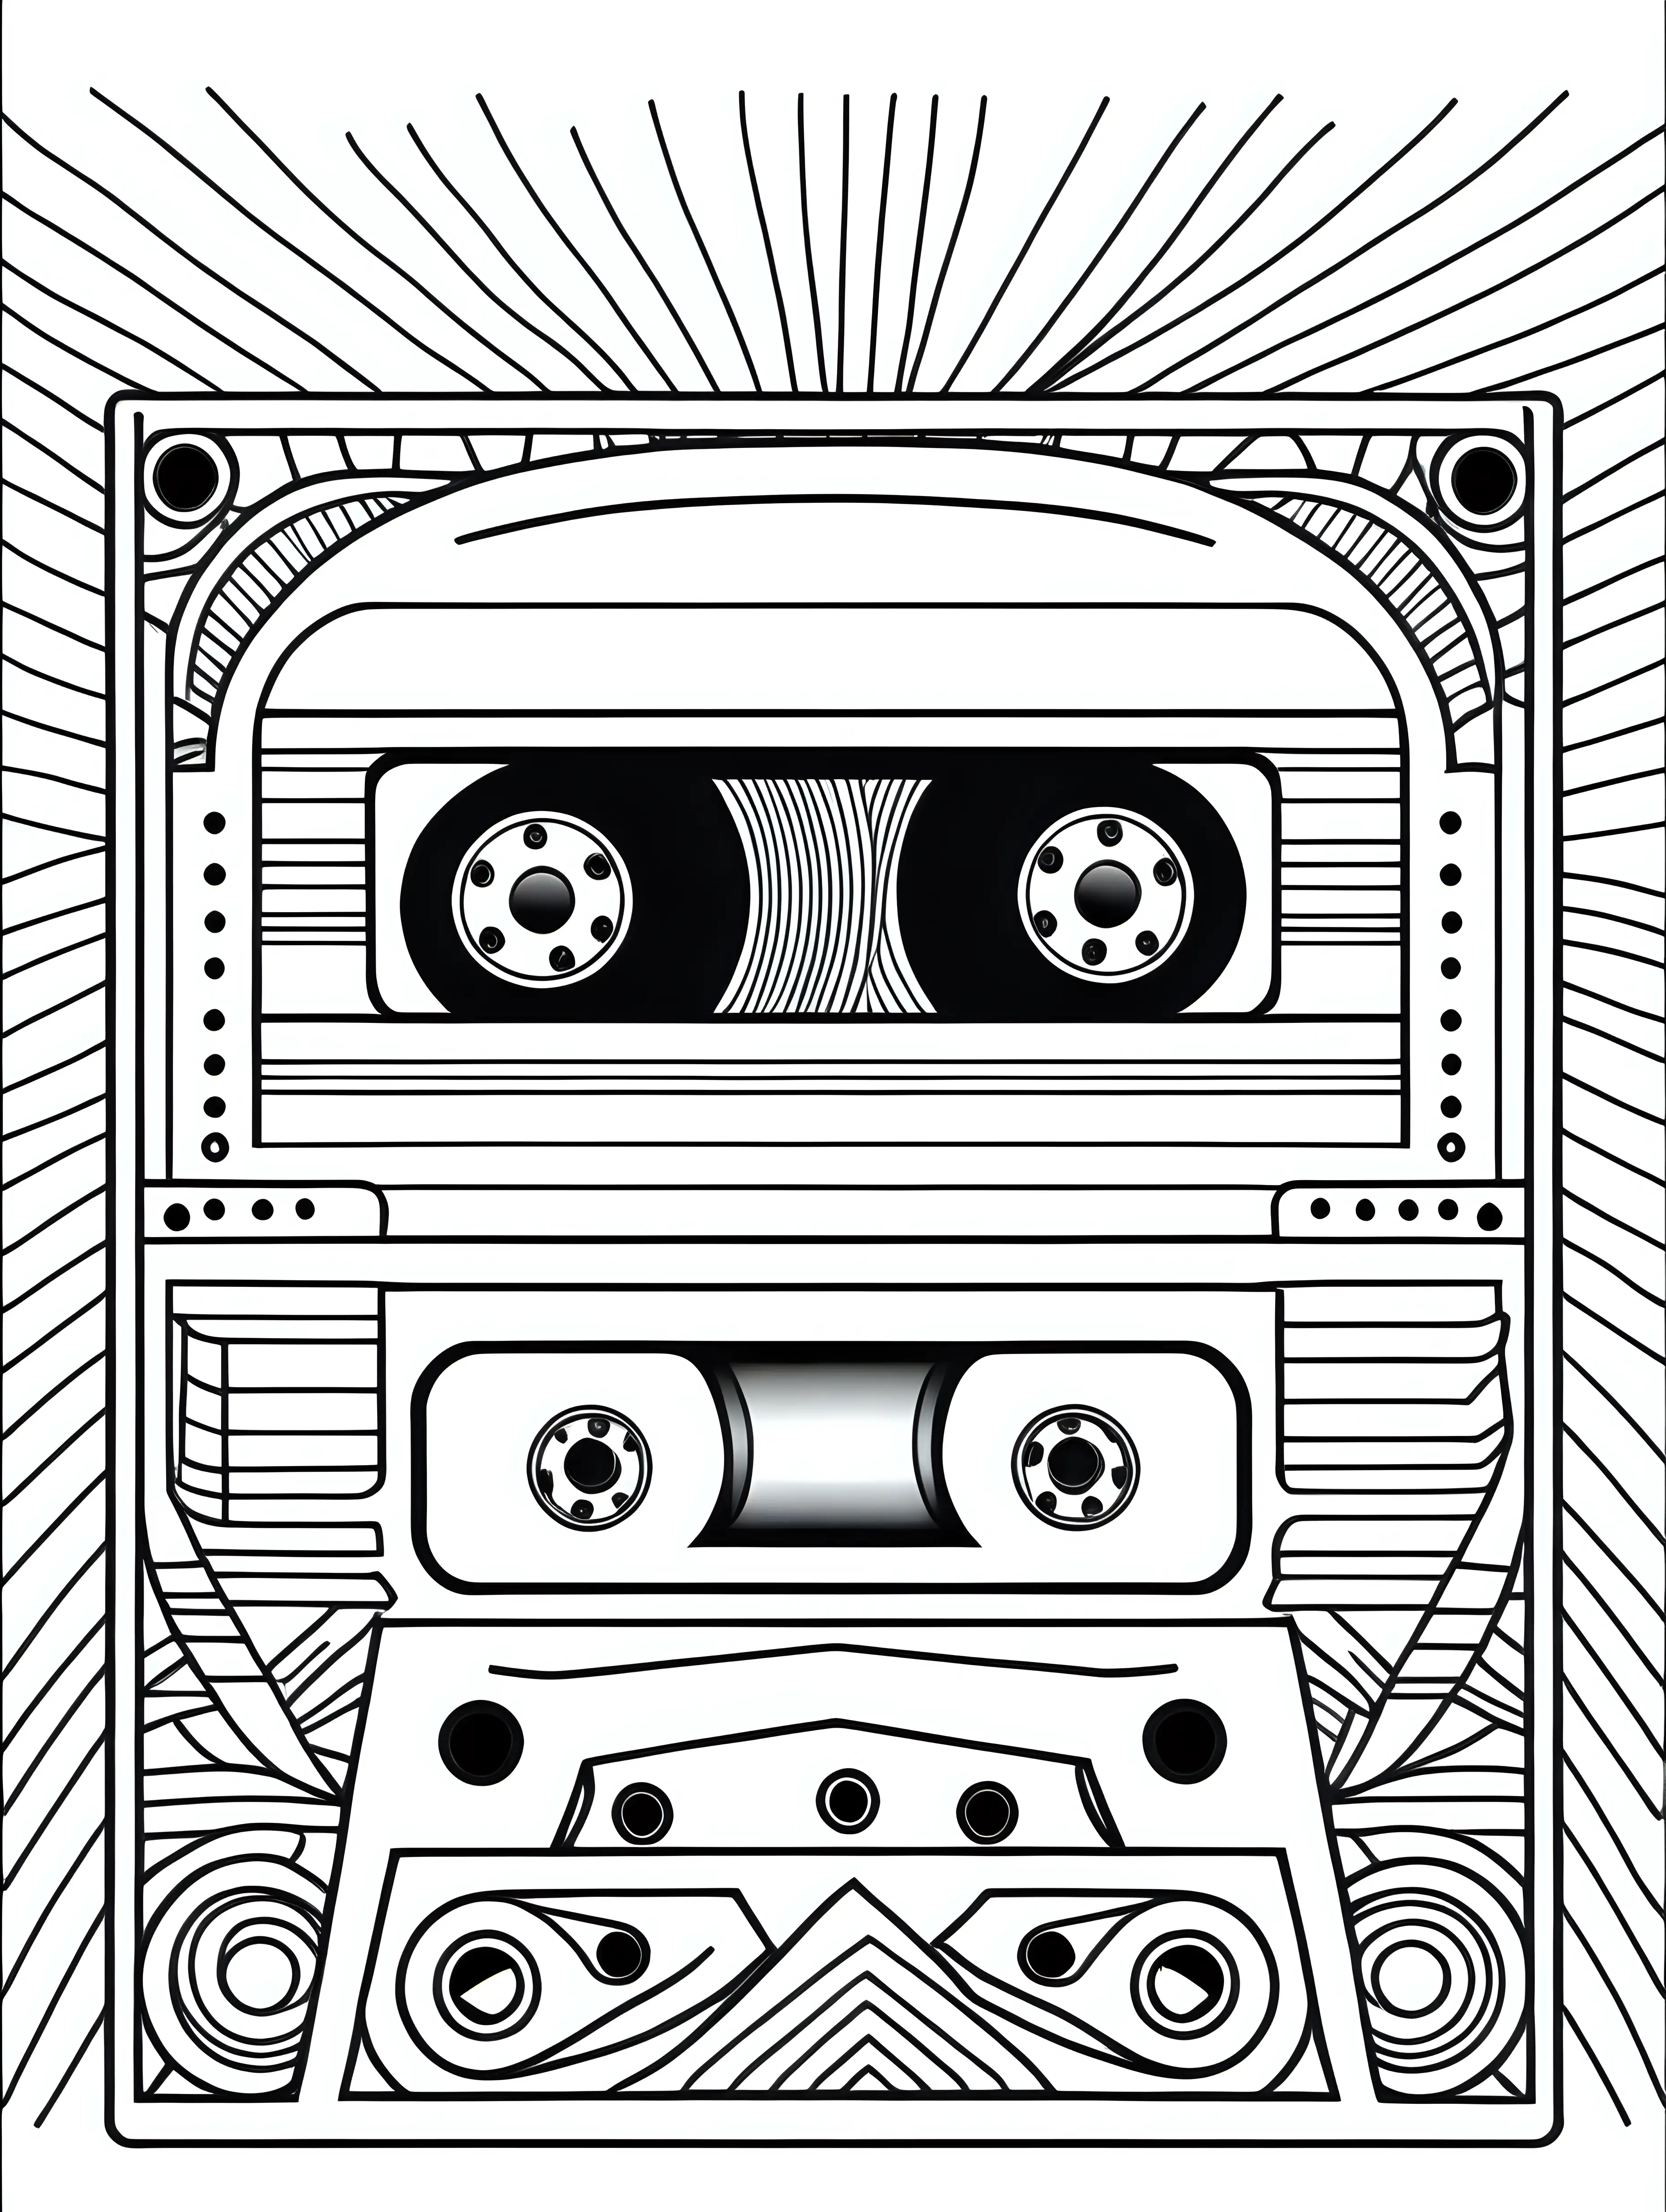 Adult coloring book page. Black and white. Simple line art. Mixed Tape with Blank Label.
